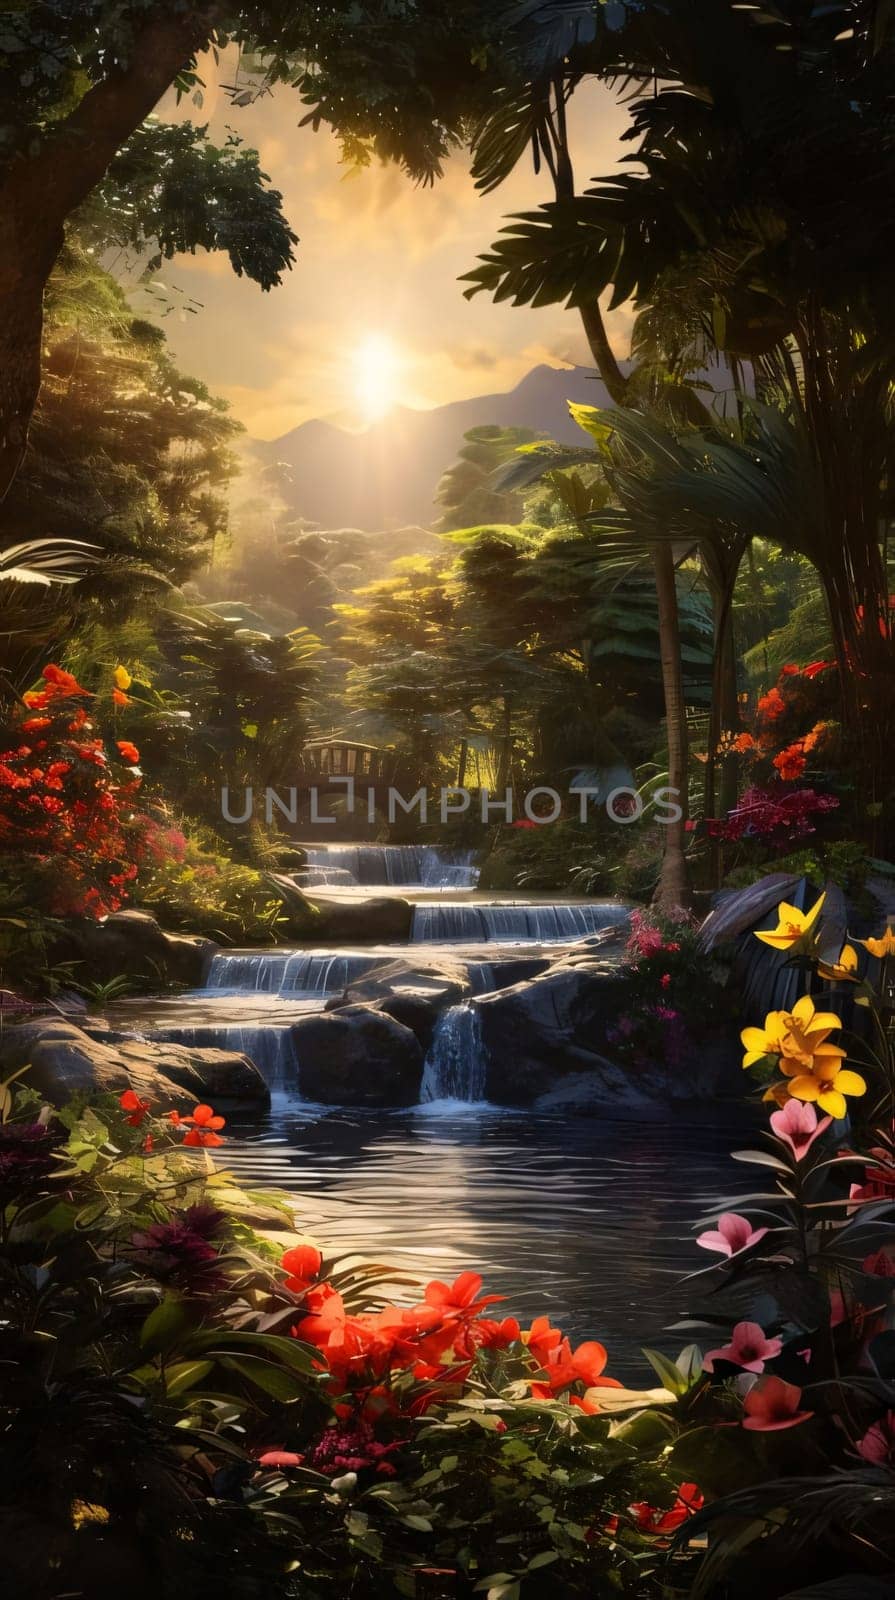 View of dense nature, nature, colorful flowers and tiny waterfalls sunset over the mountains. Flowering flowers, a symbol of spring, new life. A joyful time of nature waking up to life.